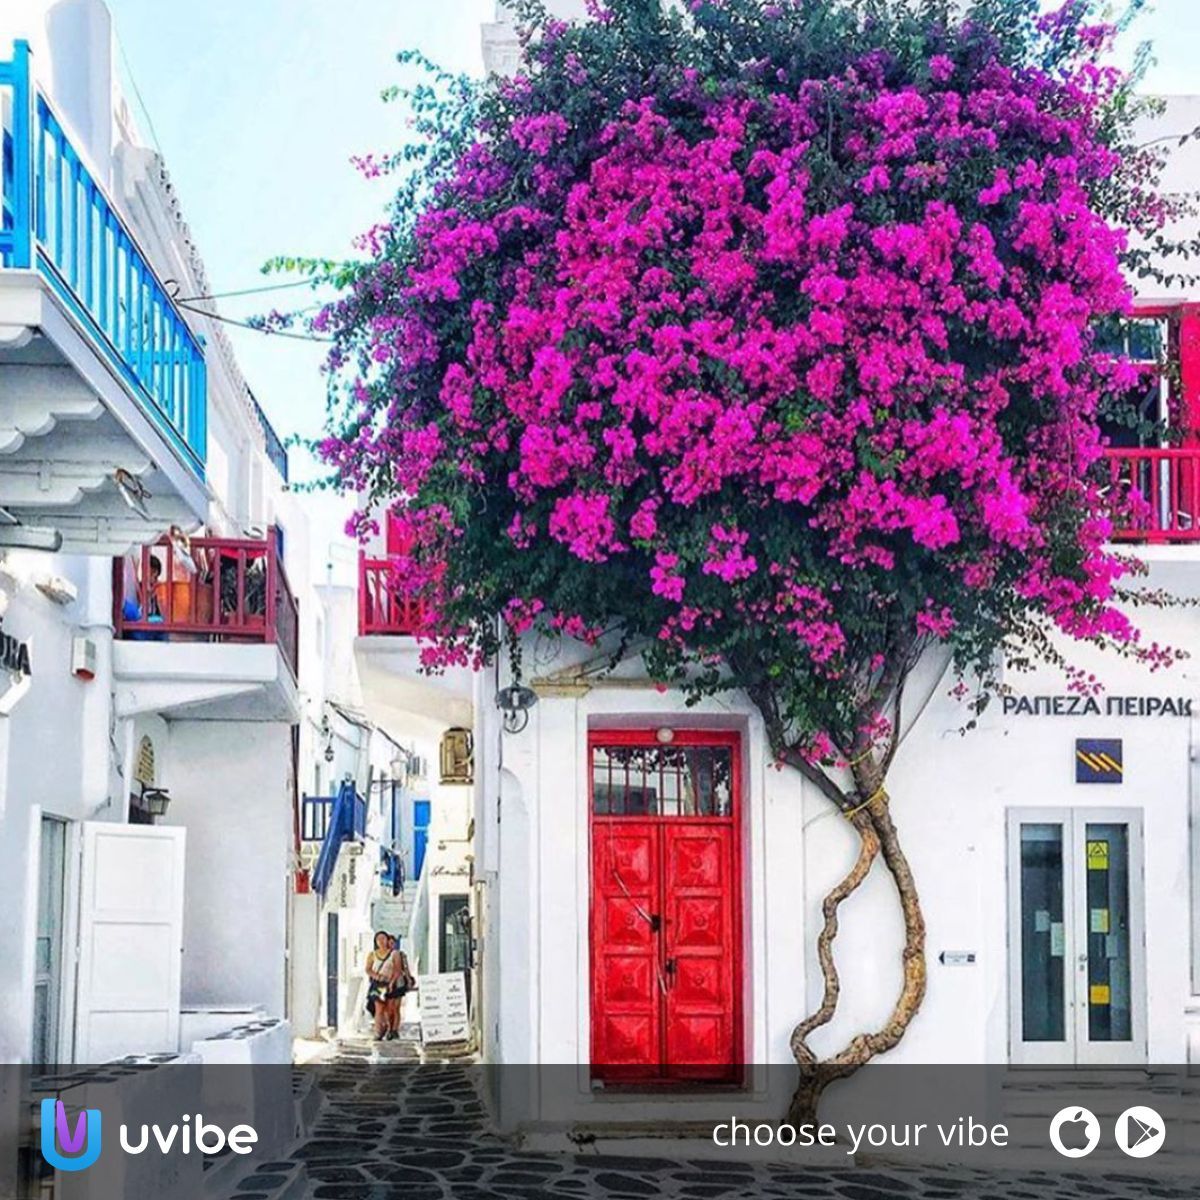 Greece seems to be the perfect Paradise. 💜 Get uVibe and discover all the fun that Greece has to offer. Get the app ➡️ buff.ly/2W9KUdA
#greece #greece_nature #great_captures_greece #love_greece #syros #athensvoice #gf_greece #travel #besthotels #luxury #lifestyle